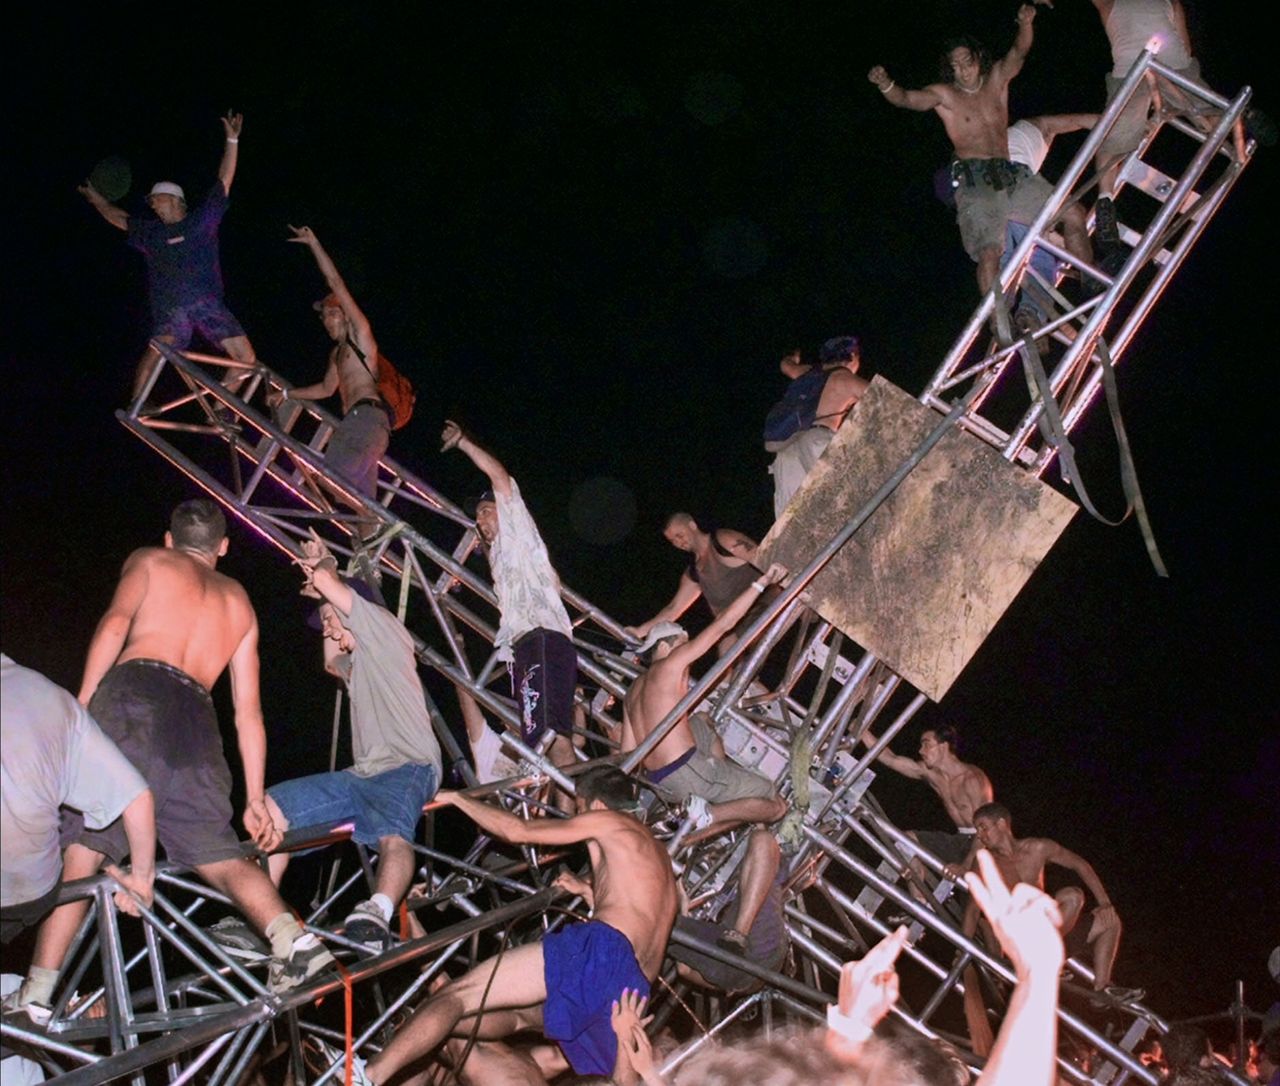 A group of young men climb to the top of a sound tower and flip it over in music festival footage shown in "Trainwreck: Woodstock '99."